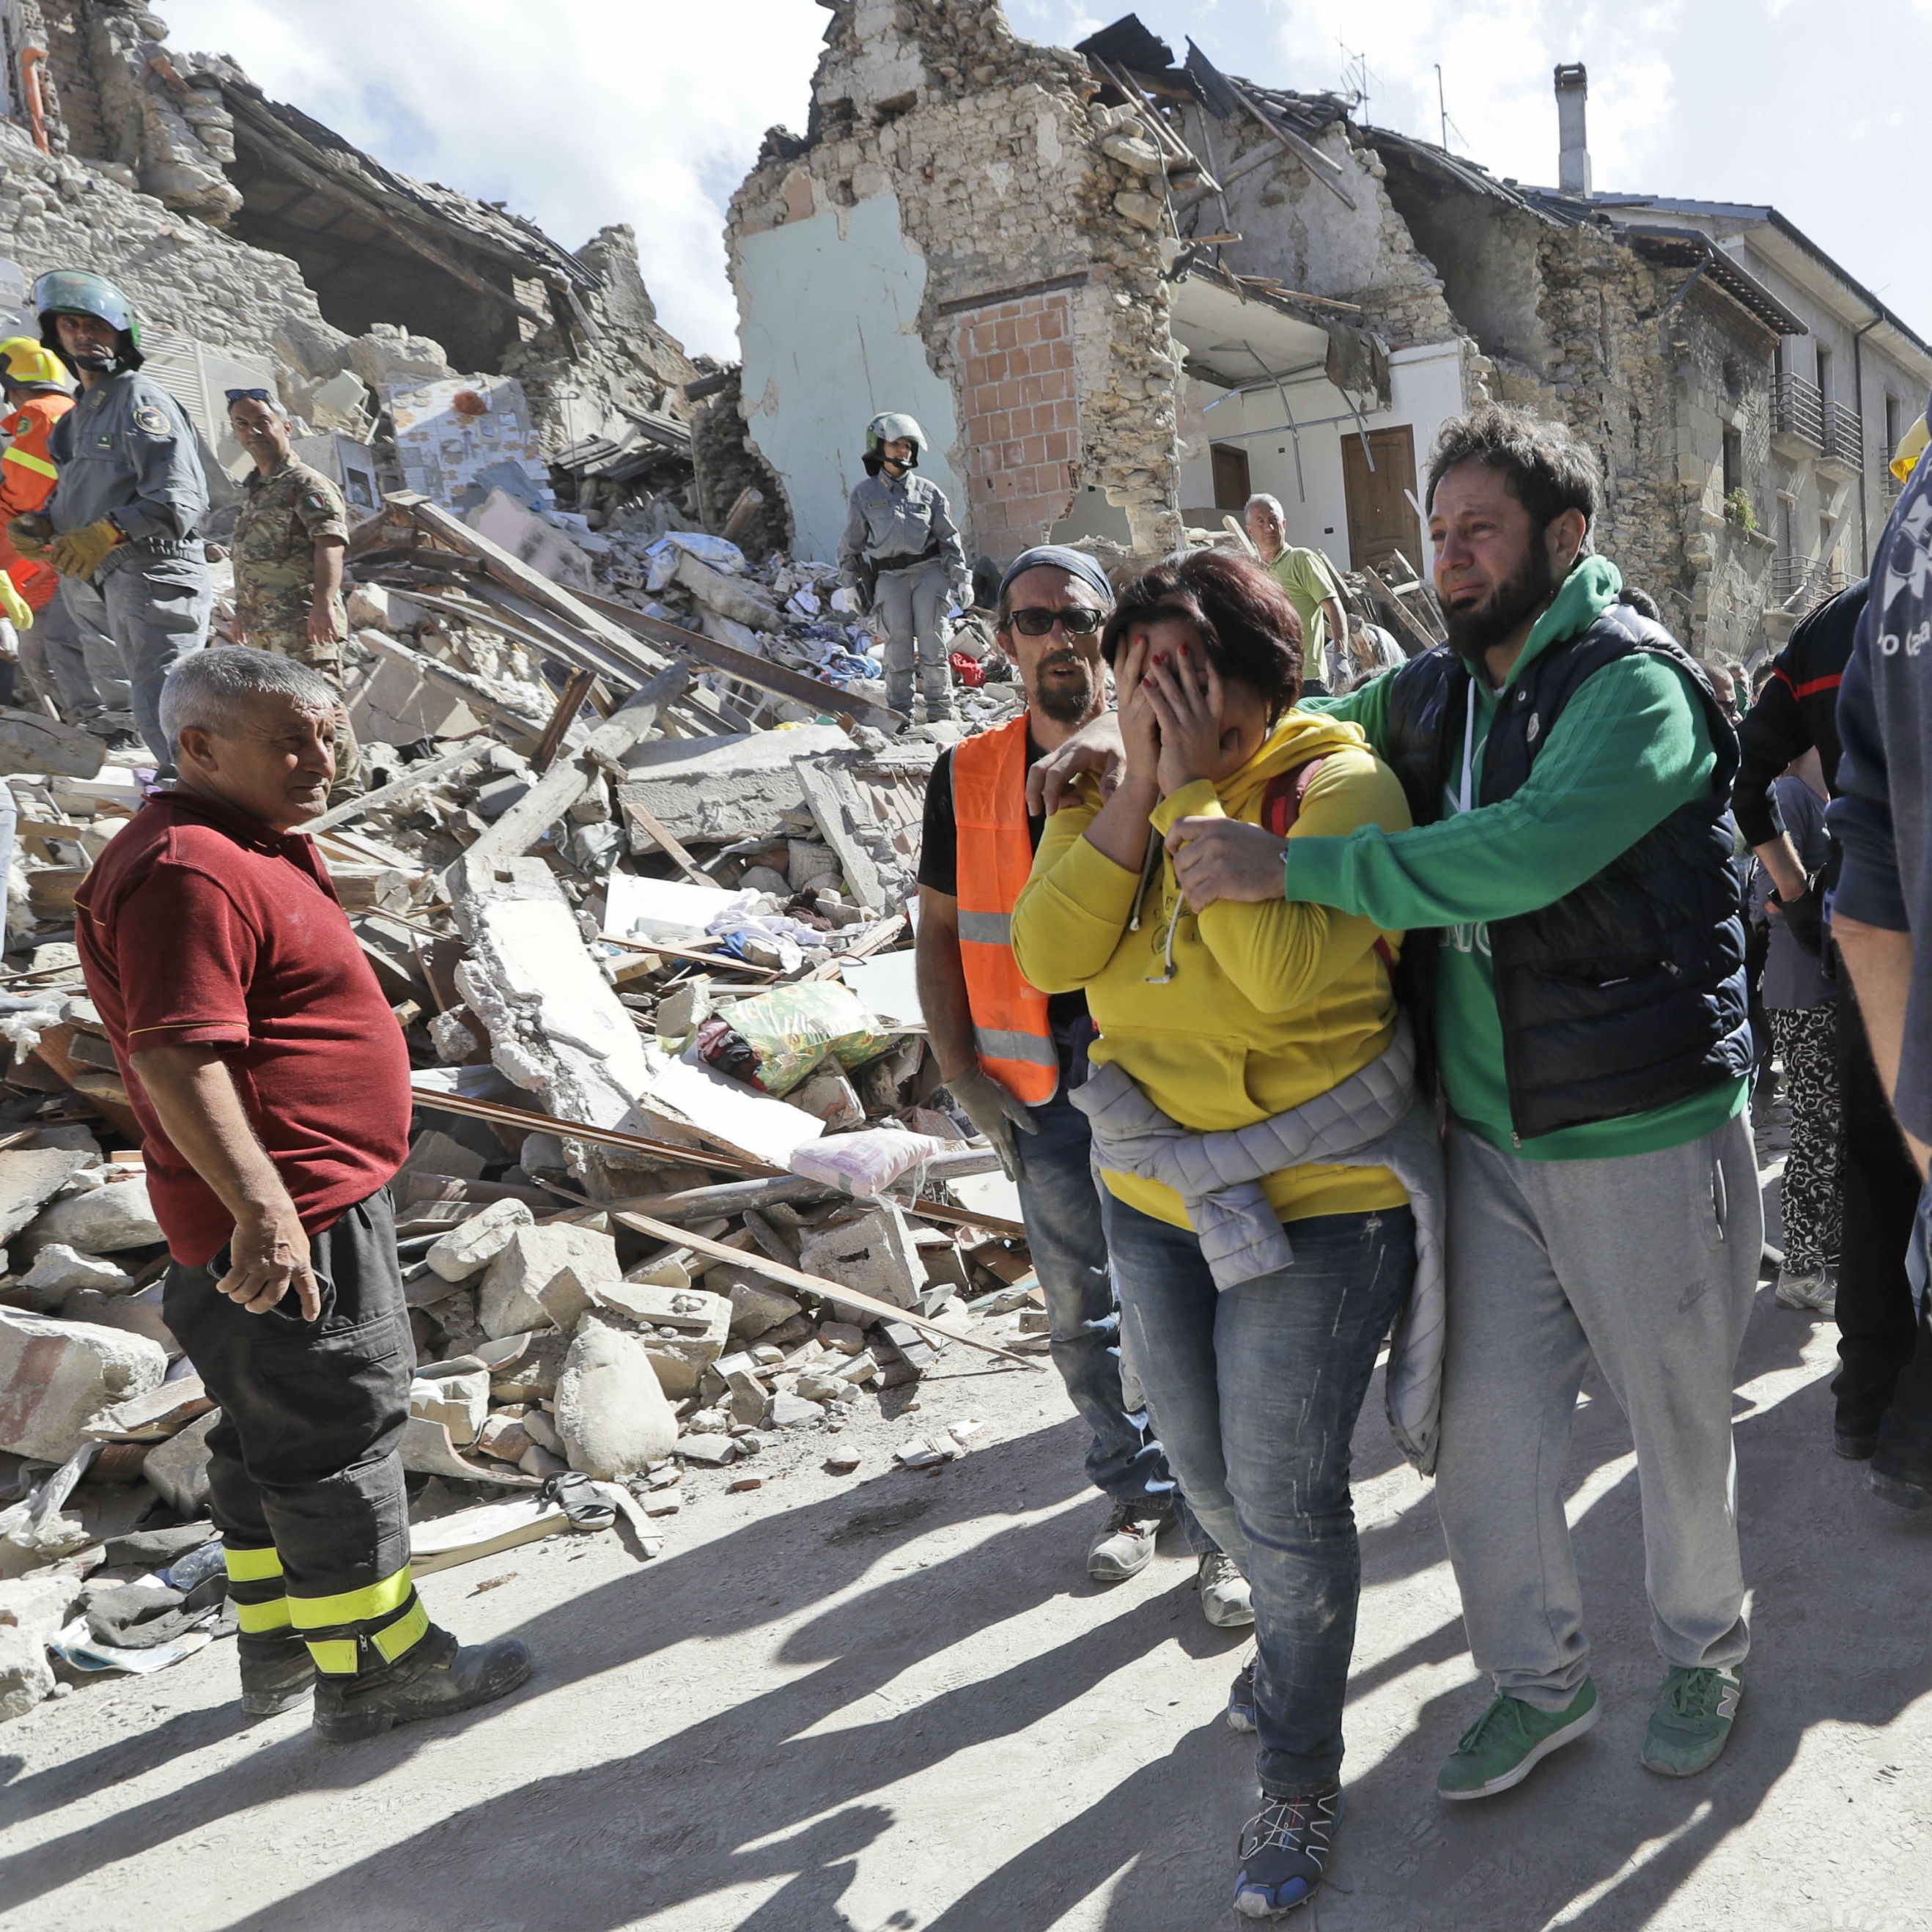 Pope Francis prays Sorrowful Mysteries for Italy earthquake victims